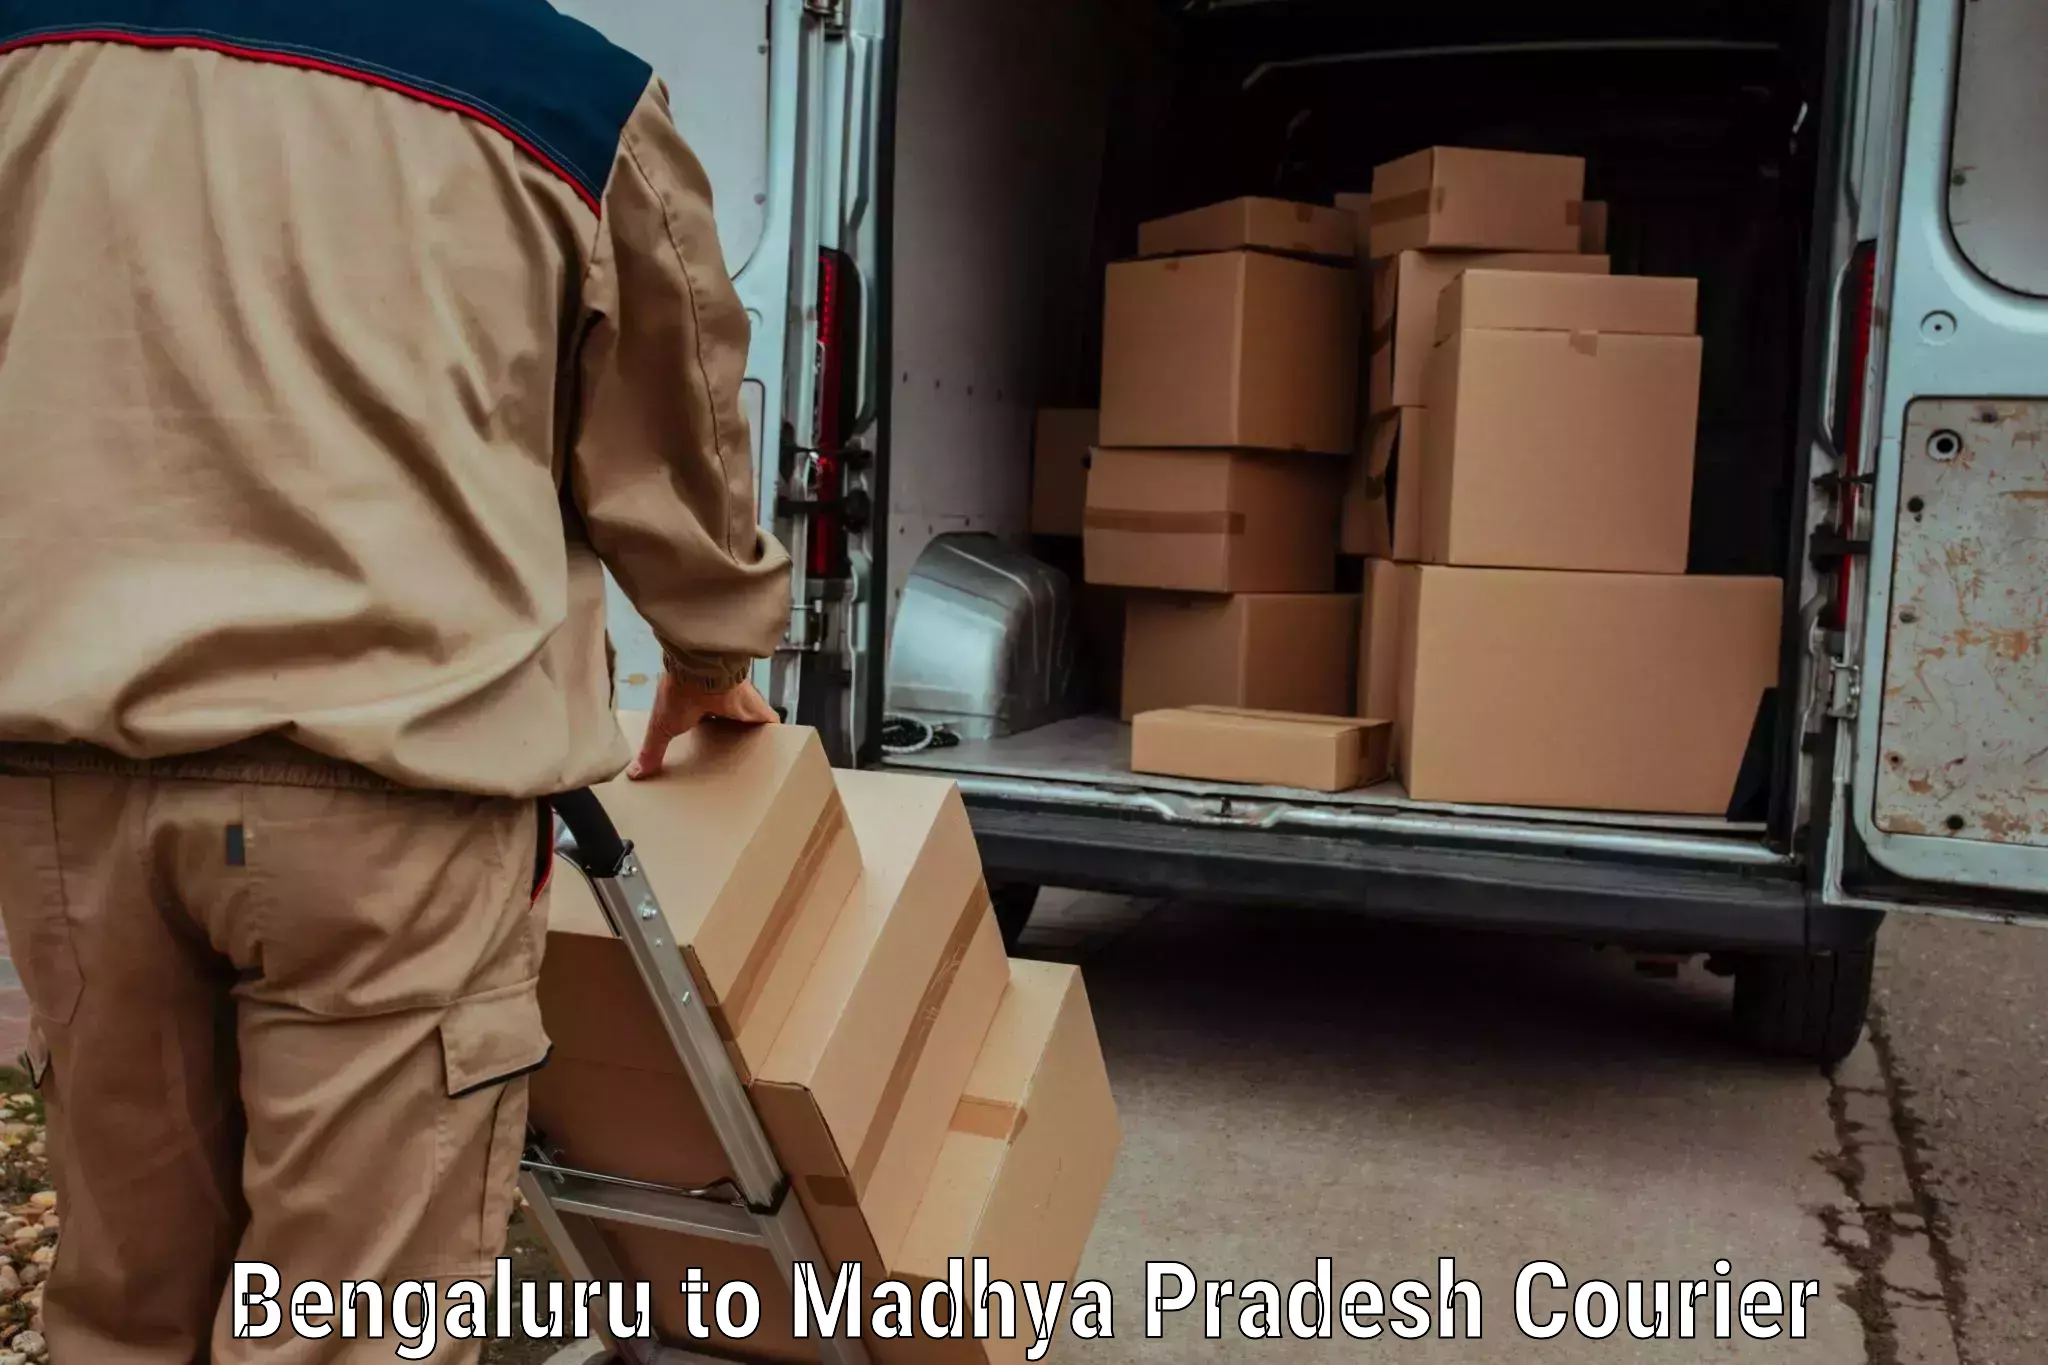 Overnight delivery services Bengaluru to Bhind